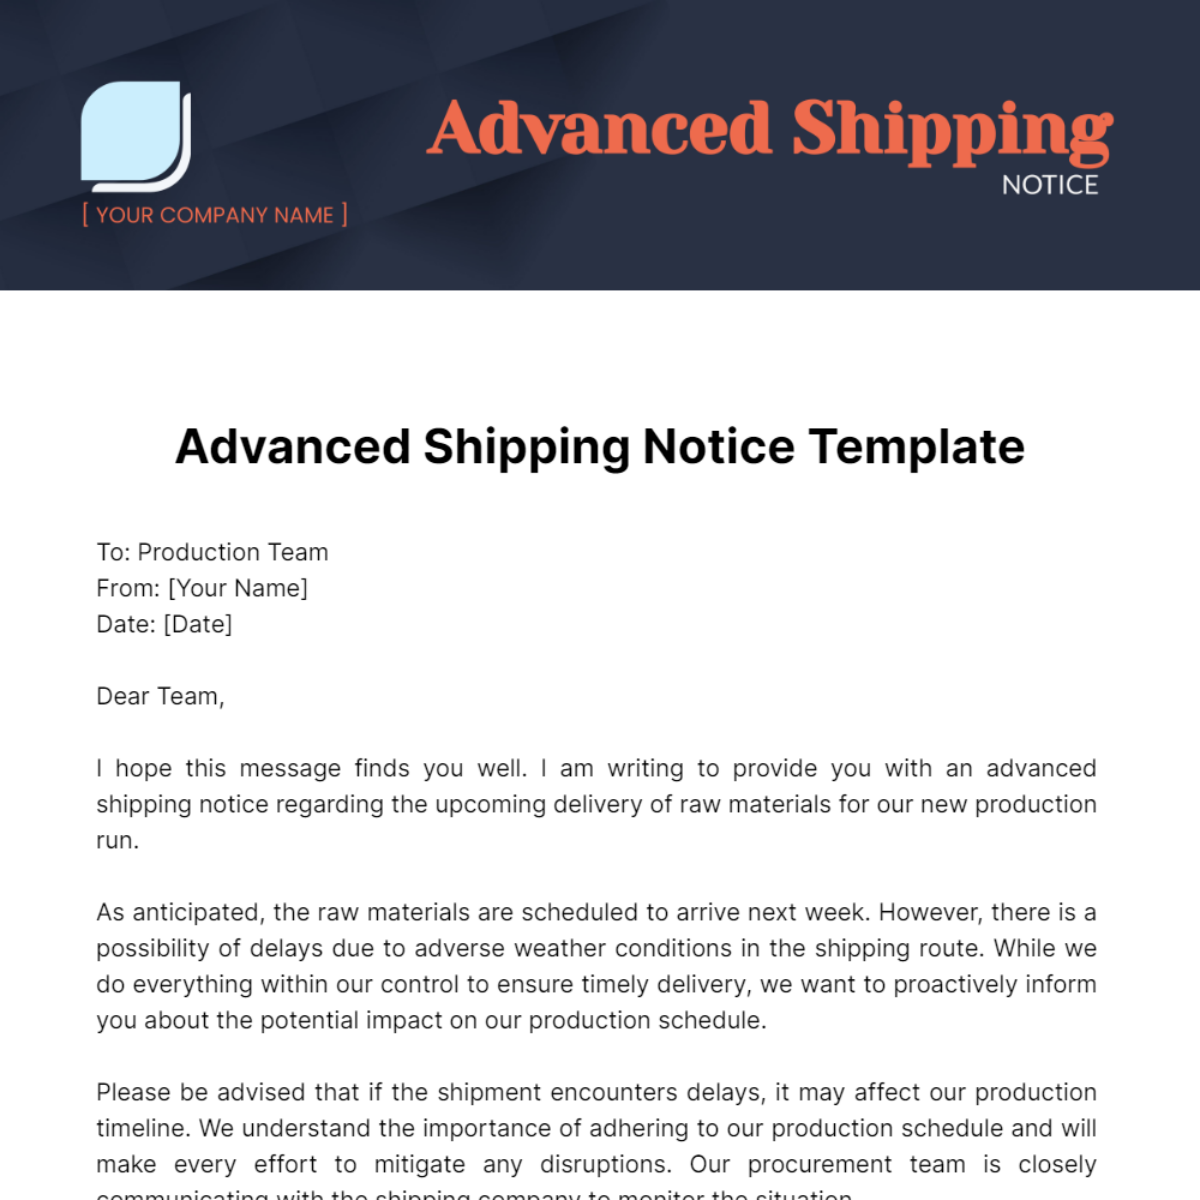 Advanced Shipping Notice Template